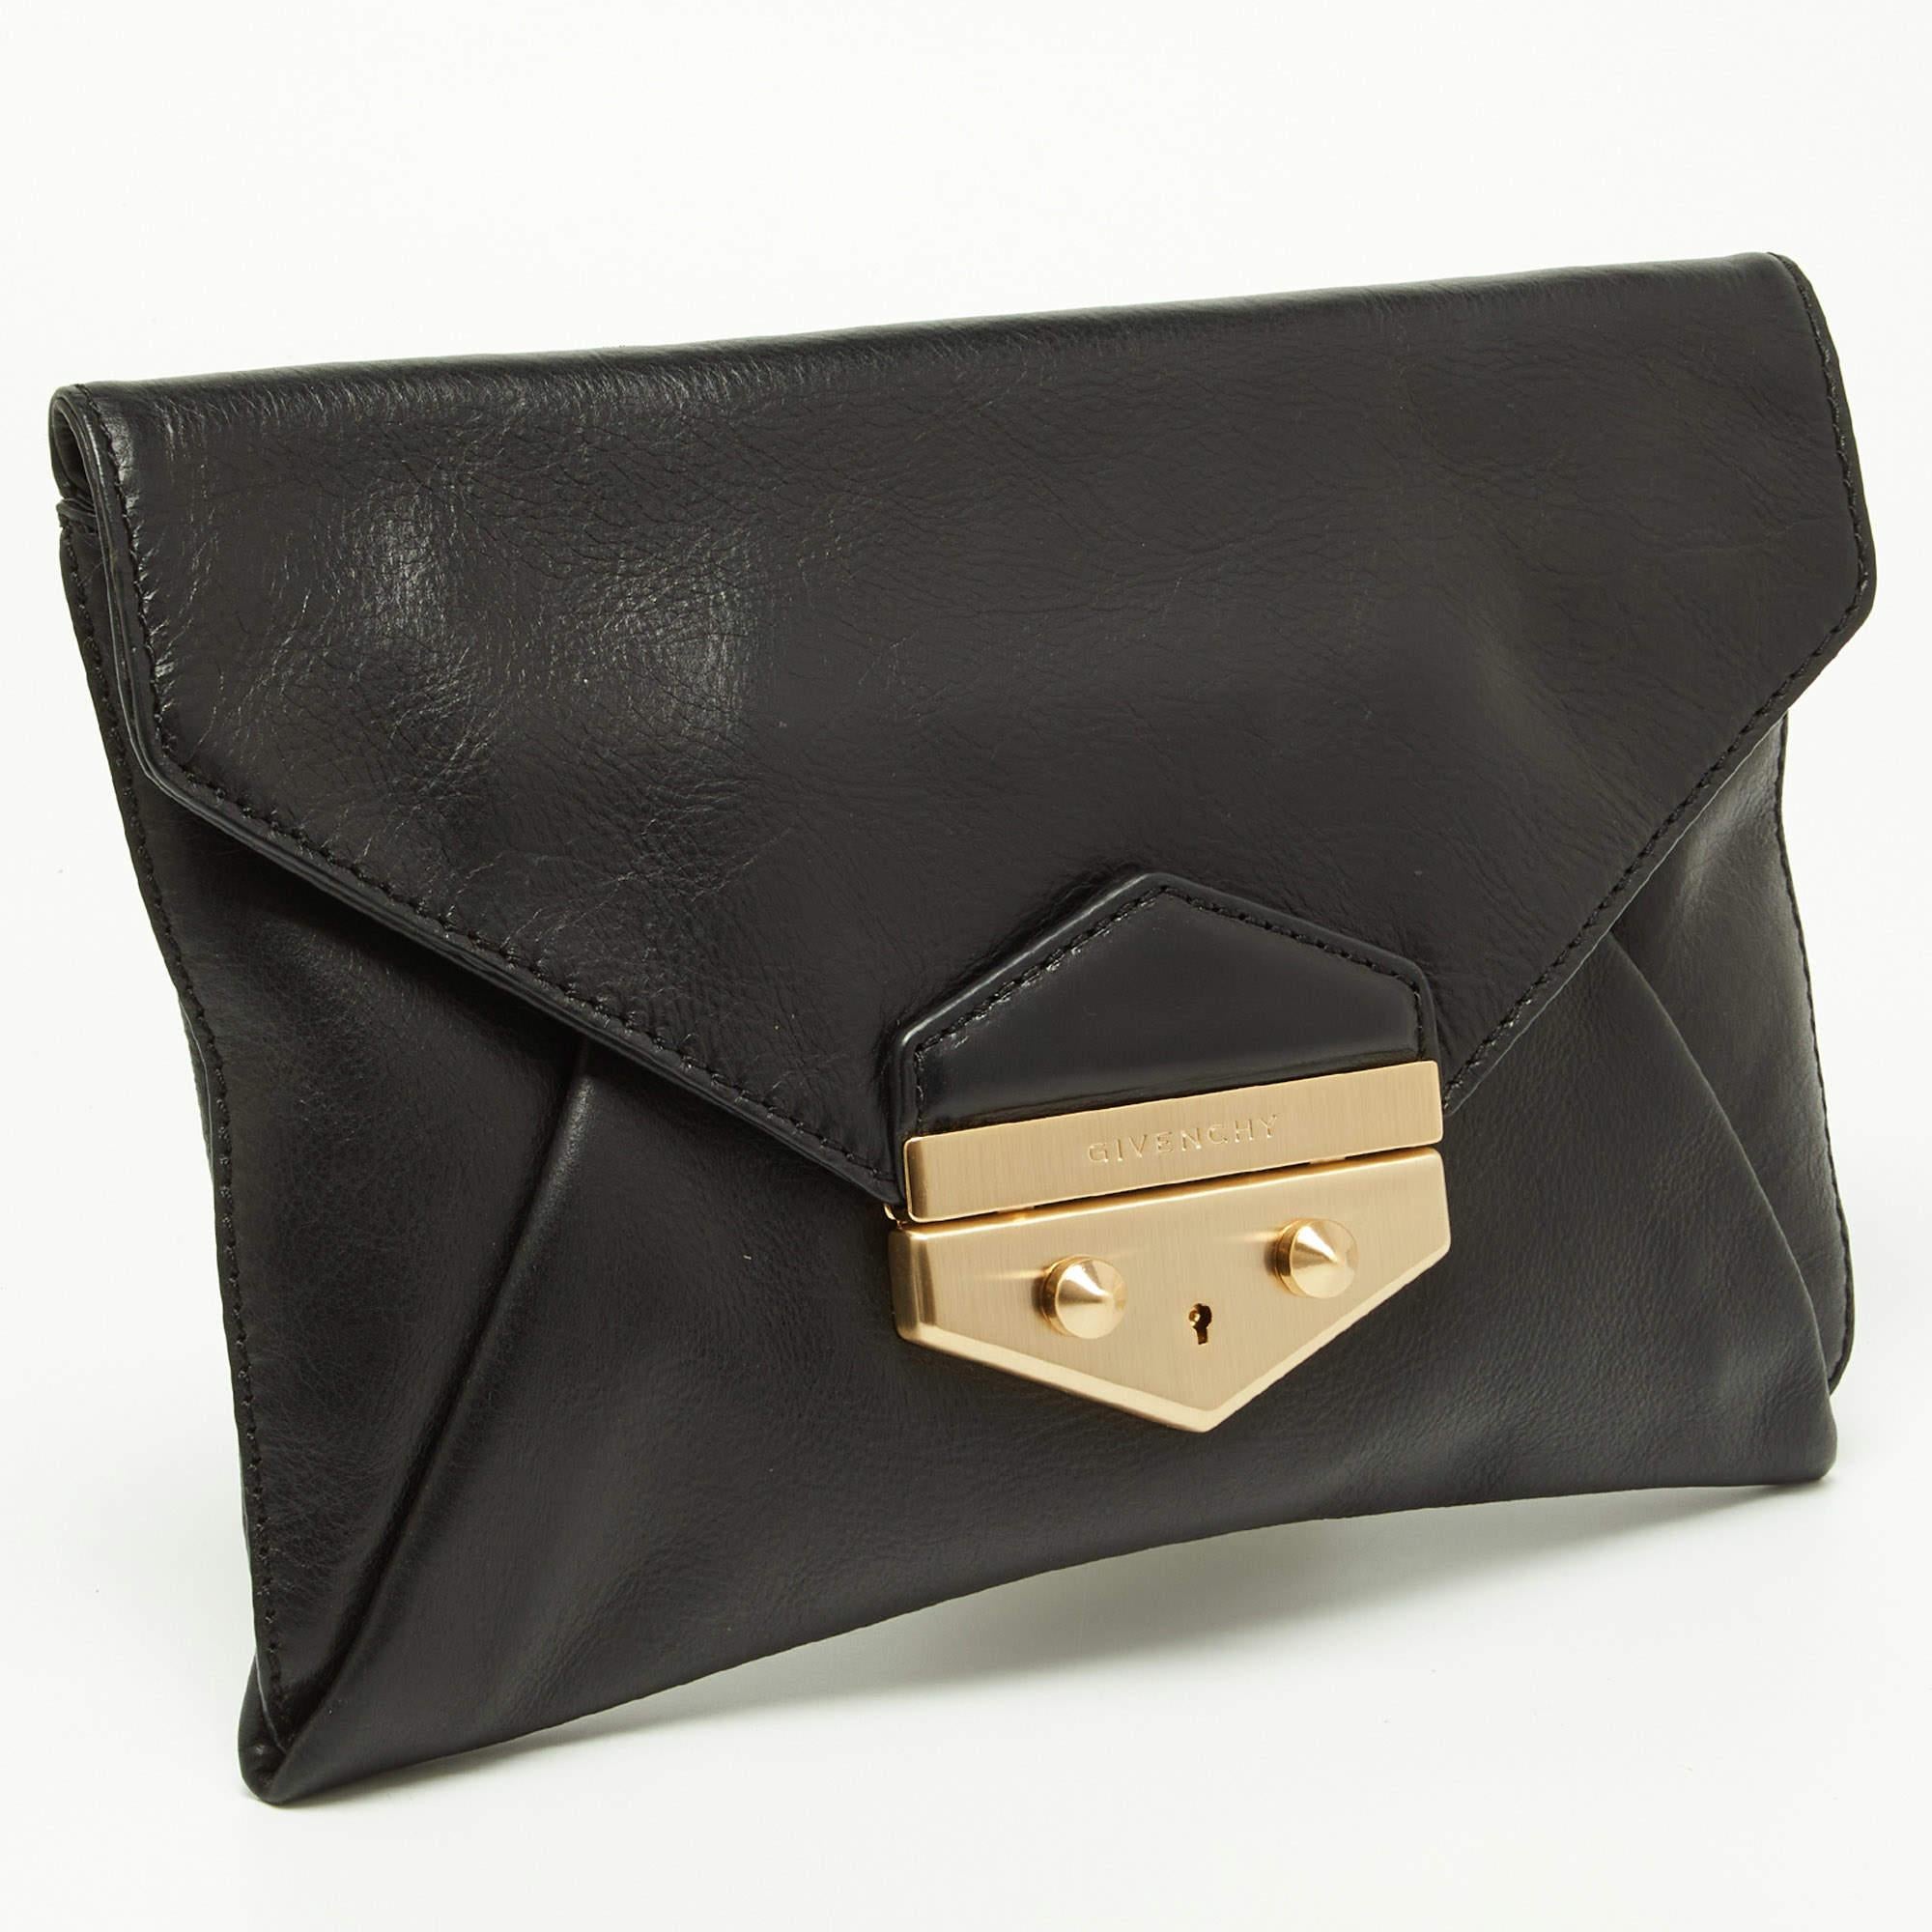 The elegant and feminine design of this beautiful Givenchy Medium Envelope Antigona clutch makes it perfect for all seasons. Crafted in black leather, this clutch will look effortlessly chic in your hand.

